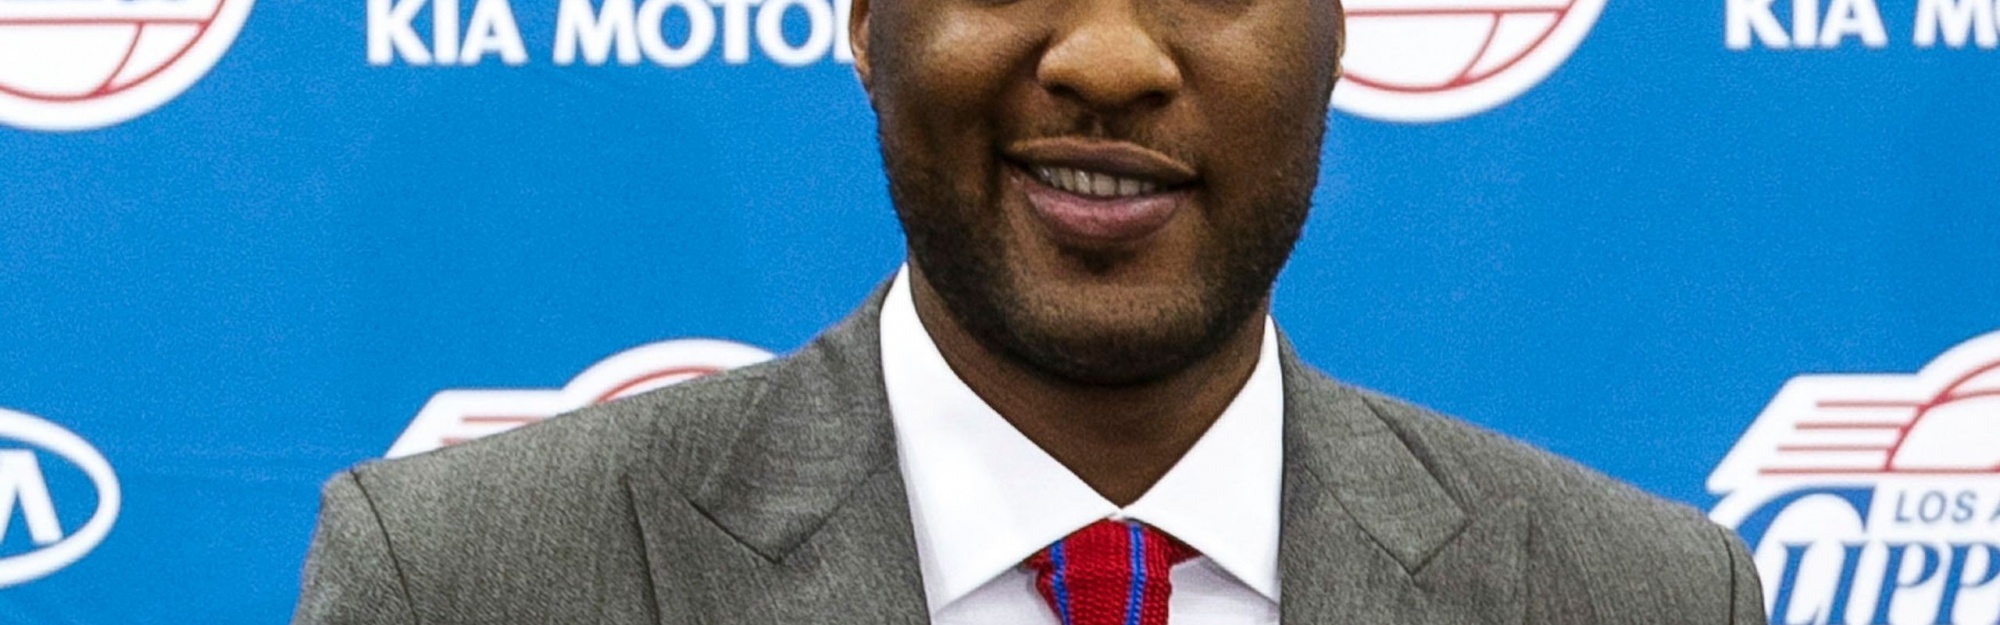 Los Angeles Clippers Nba American Professional Basketball Lamar Odom